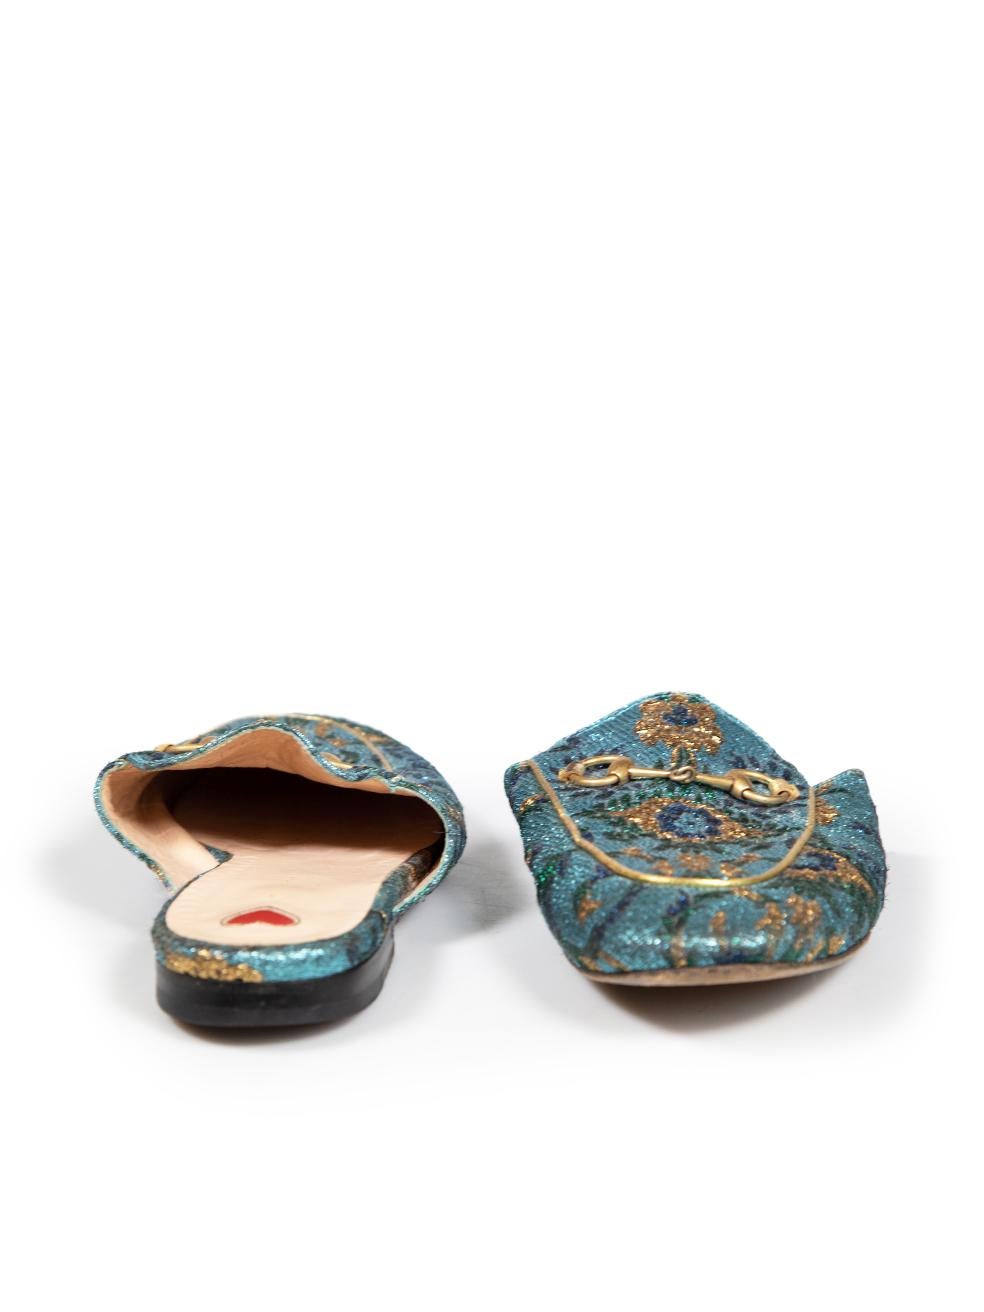 Gucci Blue Brocade Princetown Horsebit Mules Size IT 39 In Good Condition For Sale In London, GB